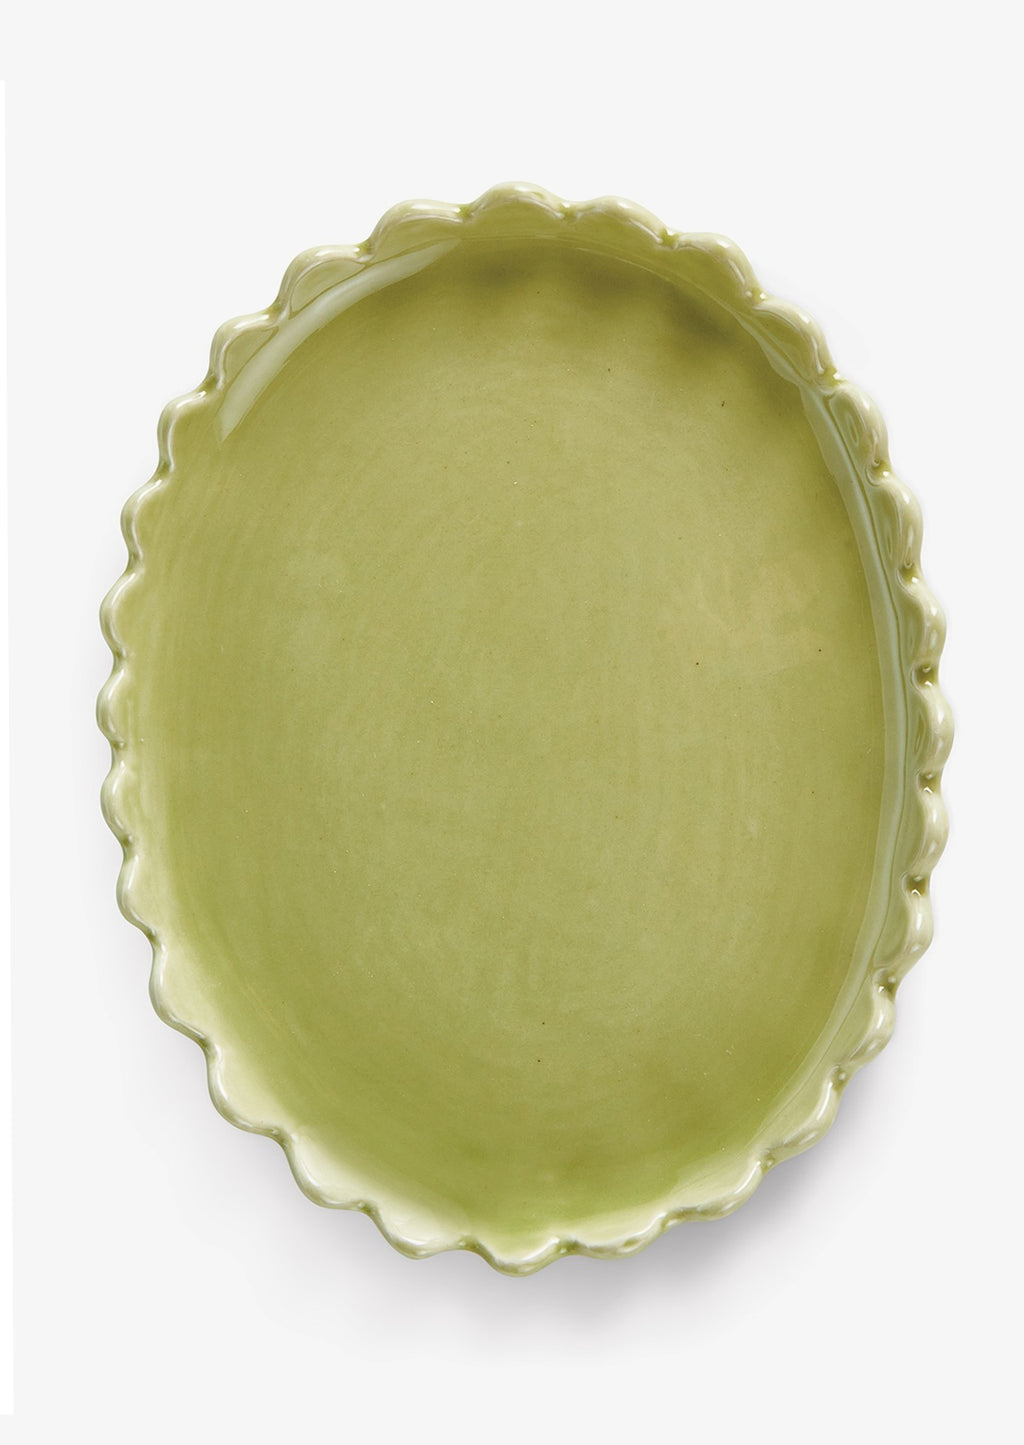 Meadow Green: A green ceramic oval tray with scalloped edges.